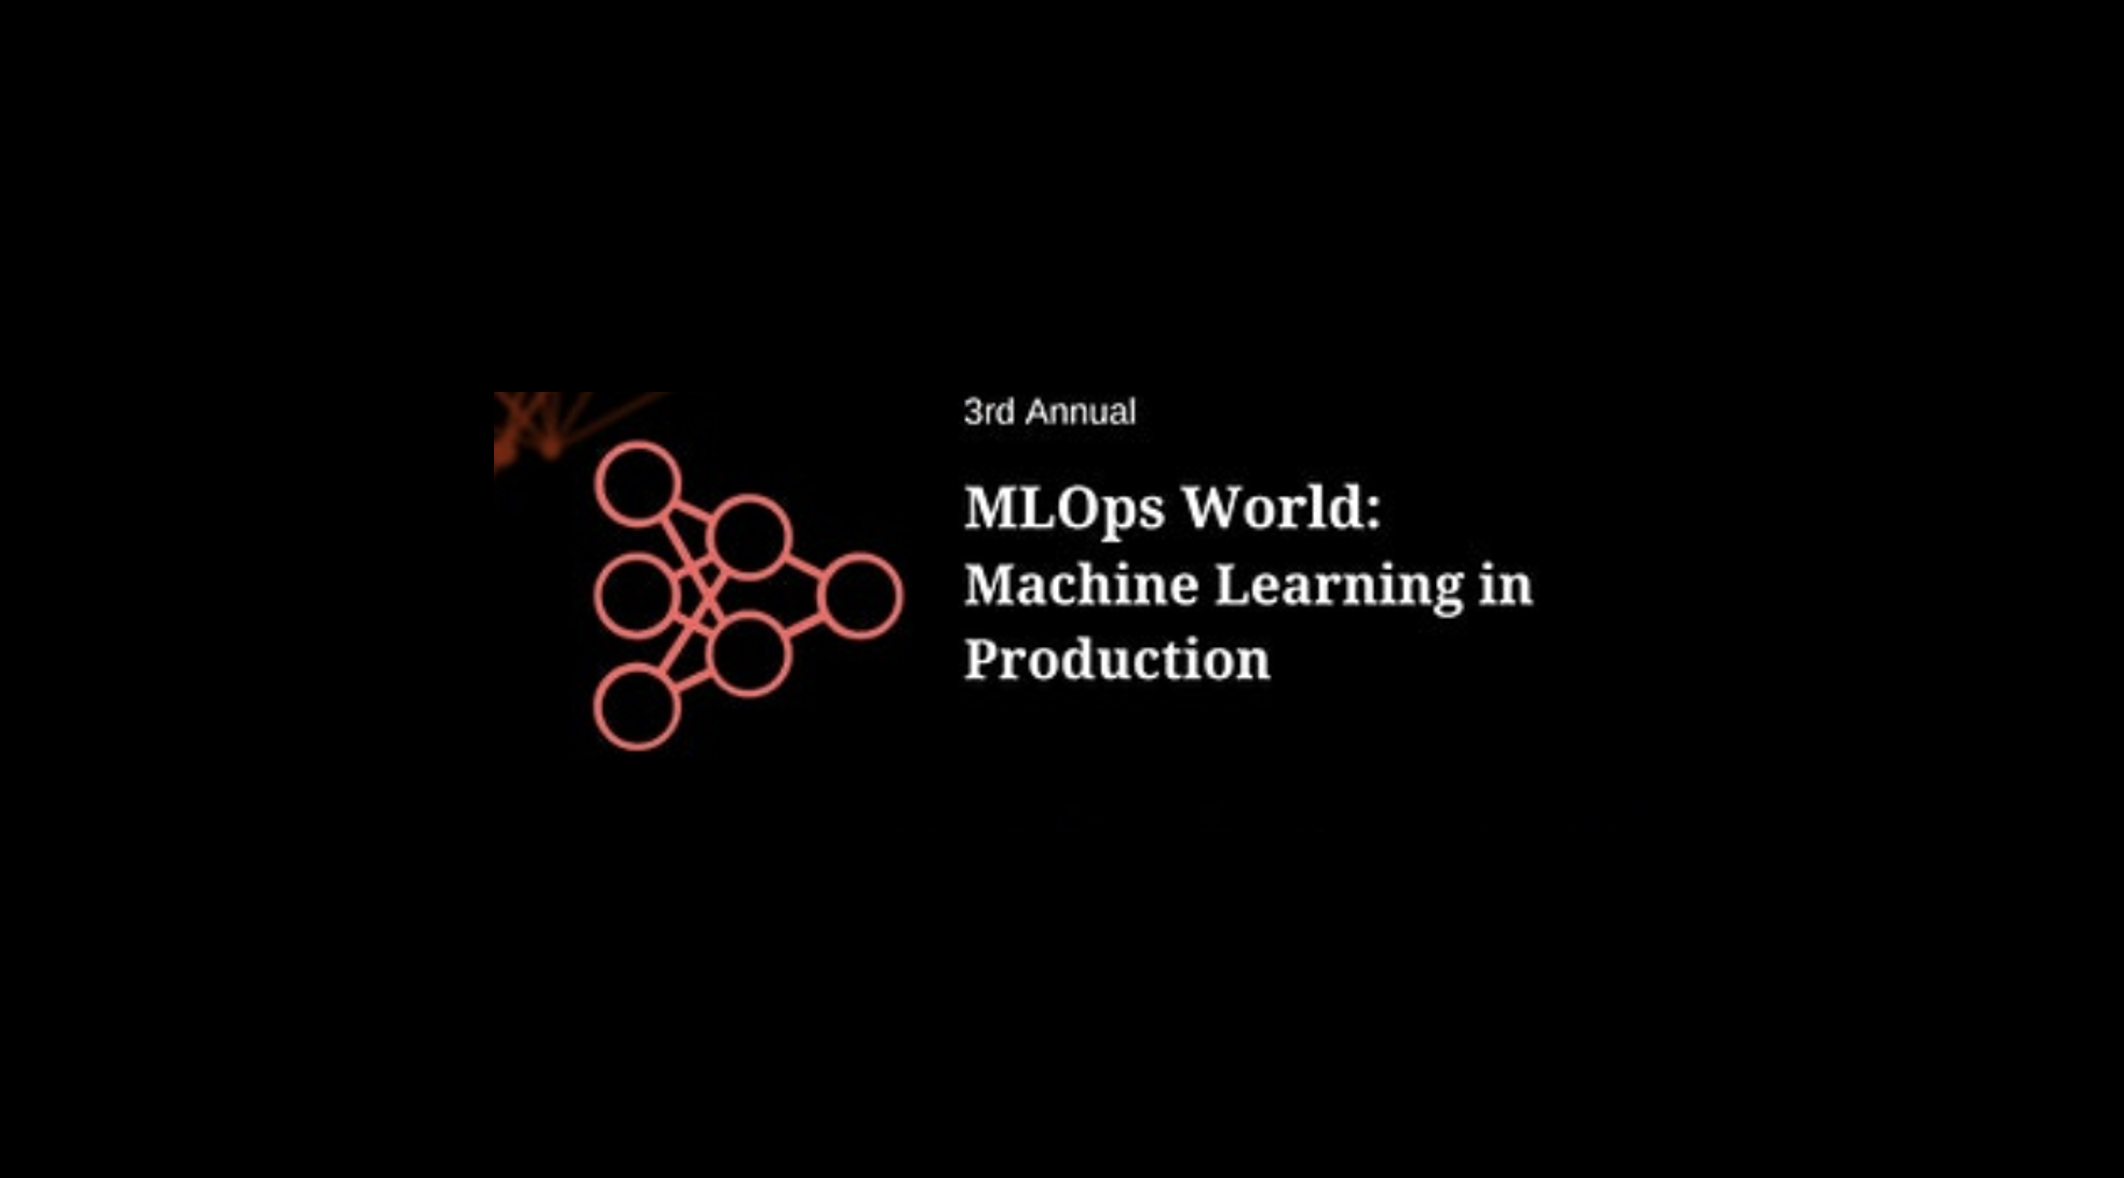 TMLS MLOps World: Conference on Machine Learning in Production 2022